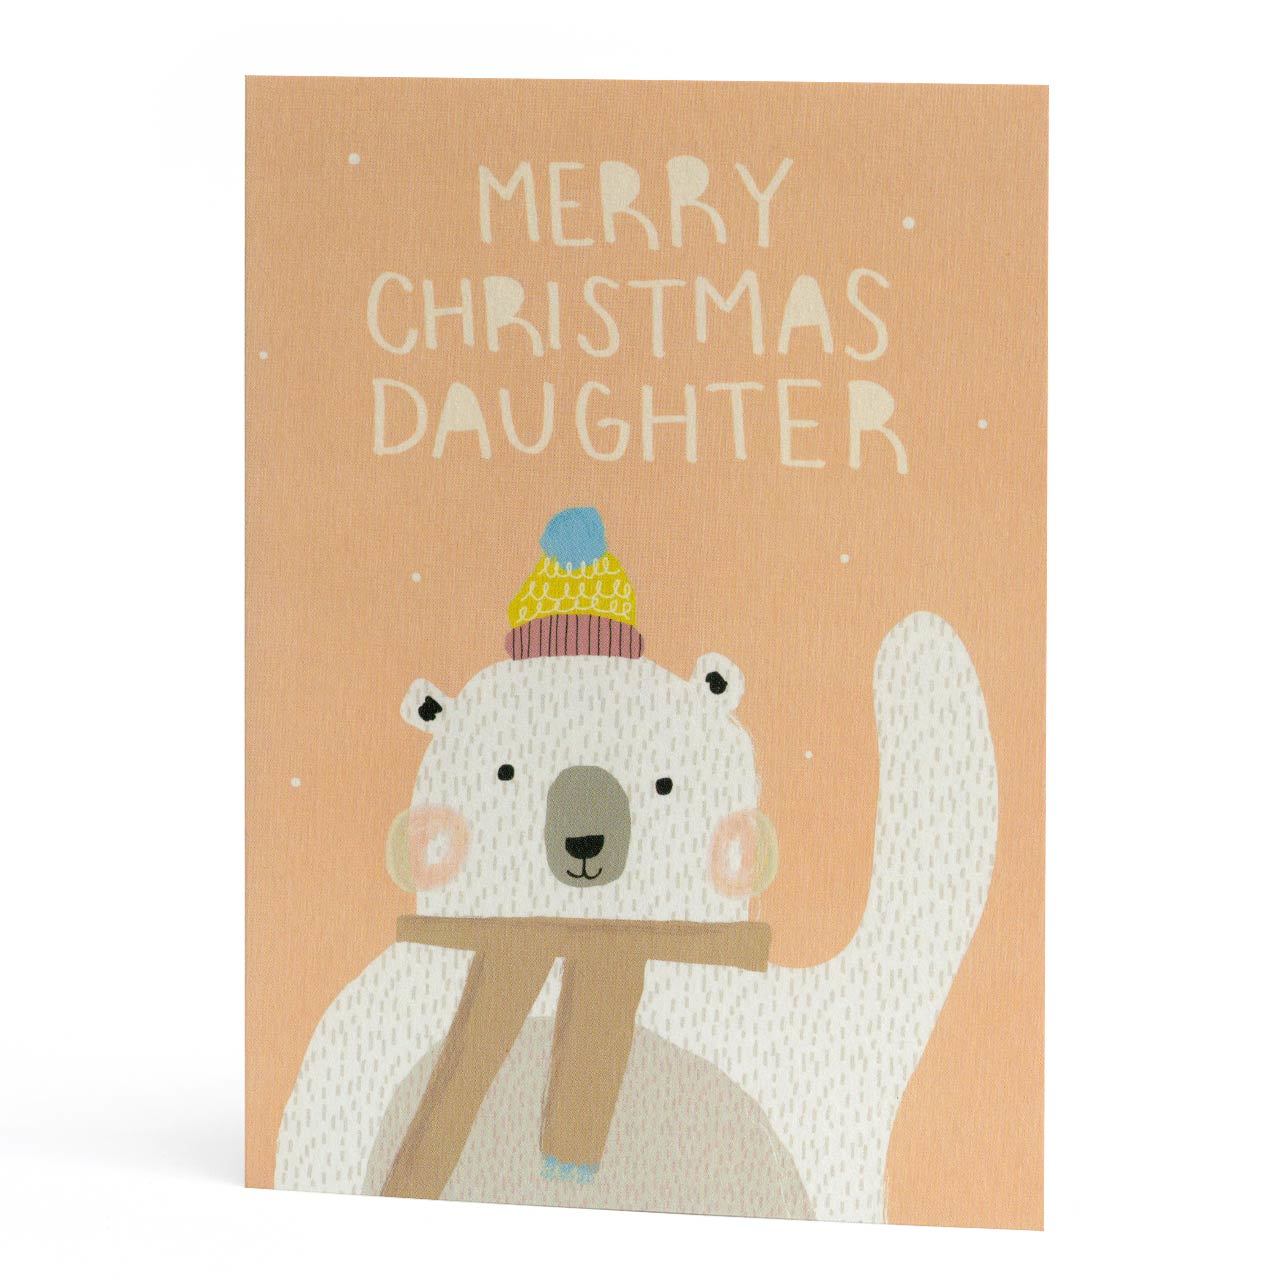 Merry Christmas Daughter Greeting Card